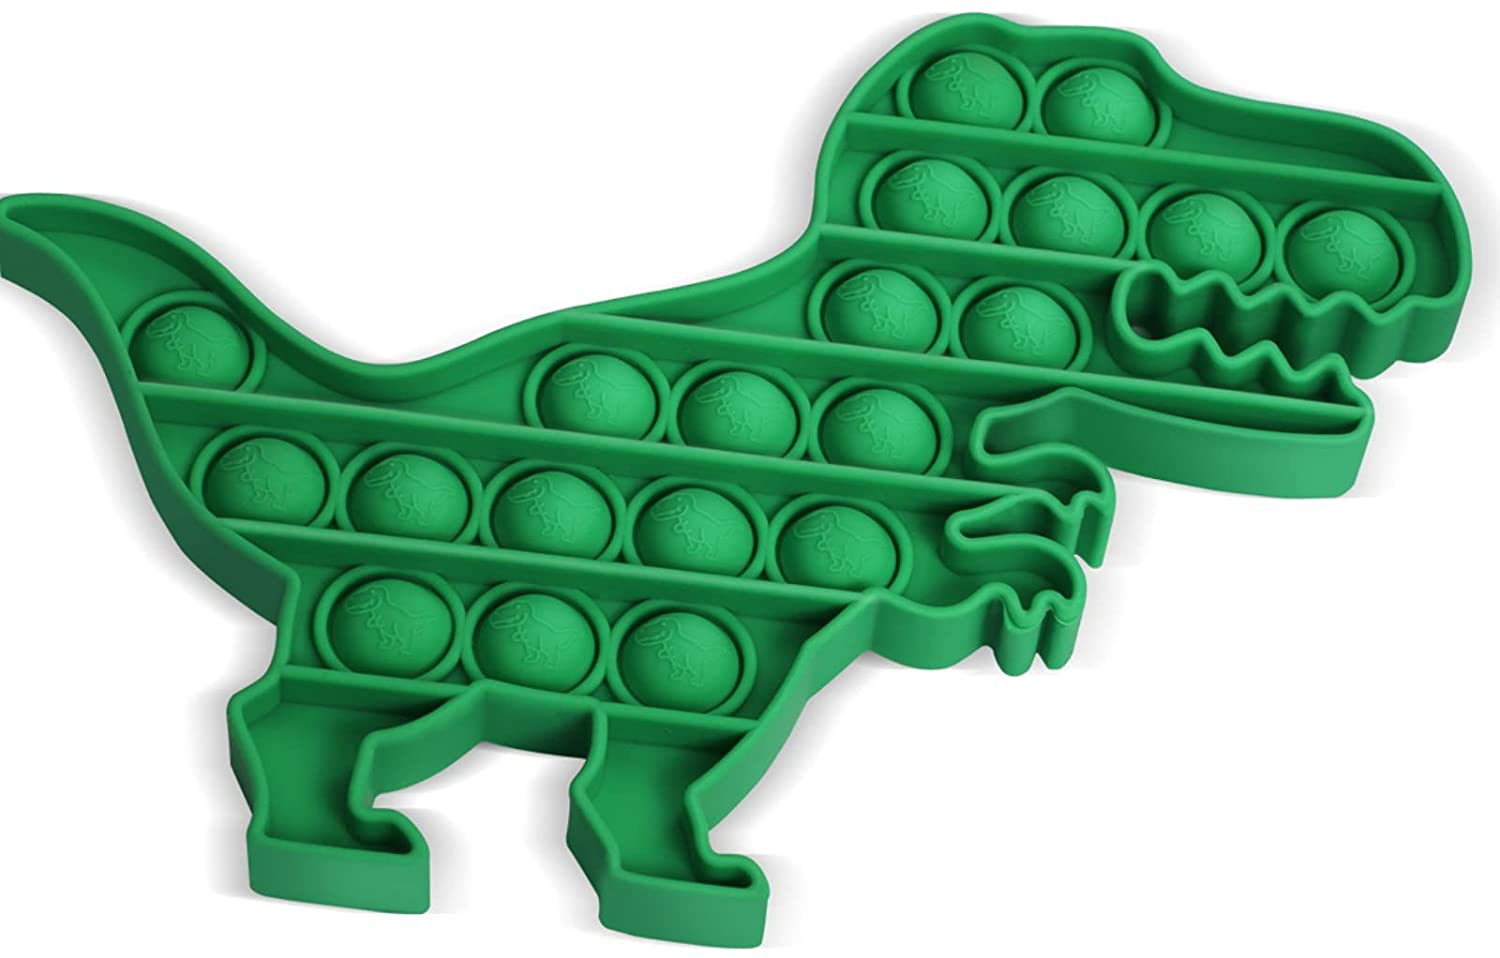 HILUDEER Pop Fidget Popping Toy , Anxiety and Stress Relief Pop Sensory Toys Silicone Logic Board Game It for Teens Kids and Adults (Green Dinosaur)